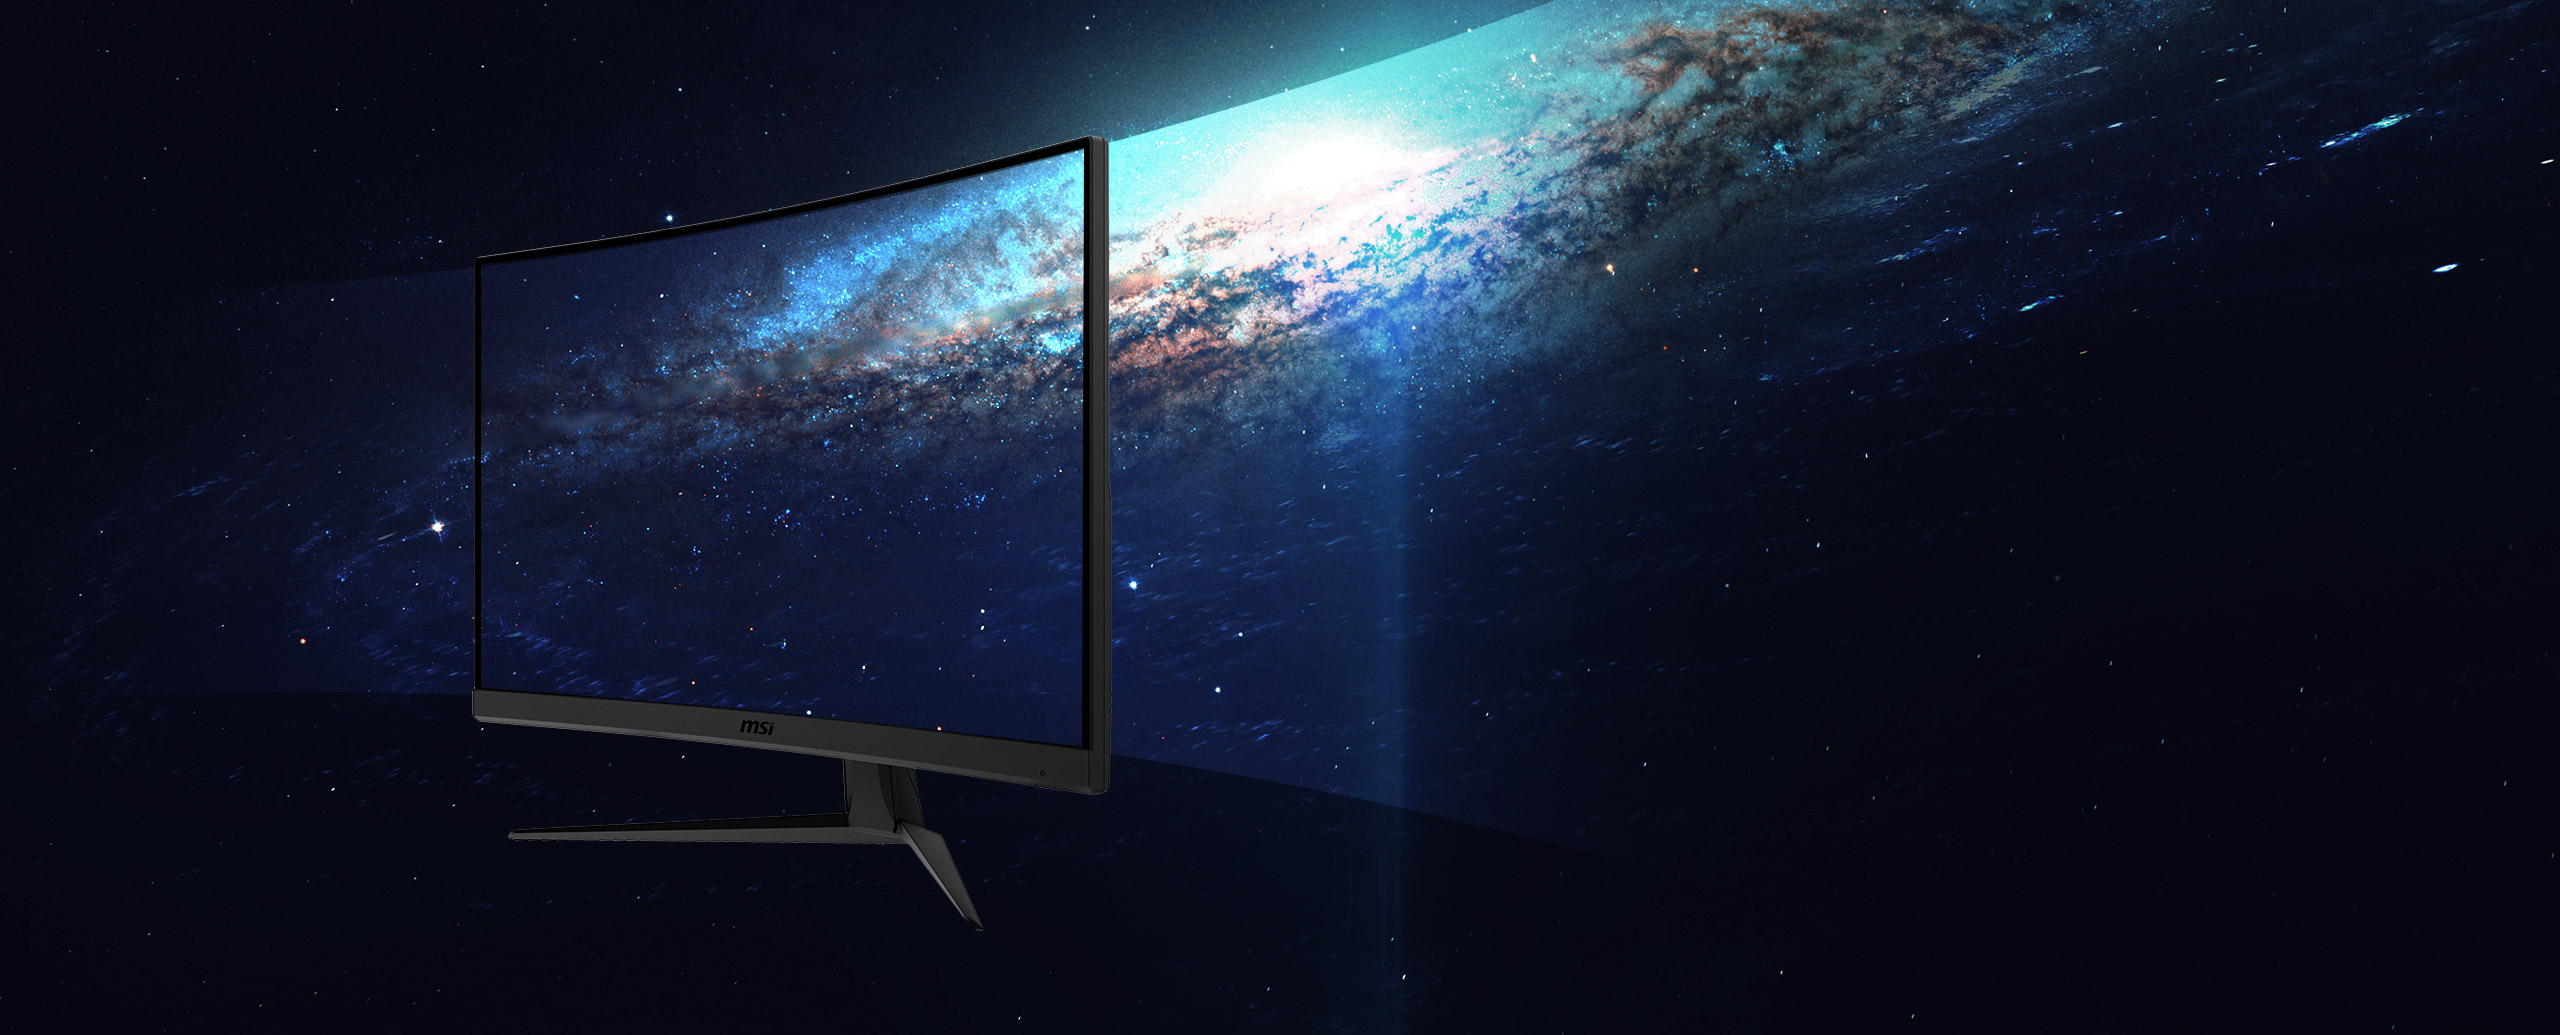 a monitor with a space image as screen showing the effect of 178 degrees of angle